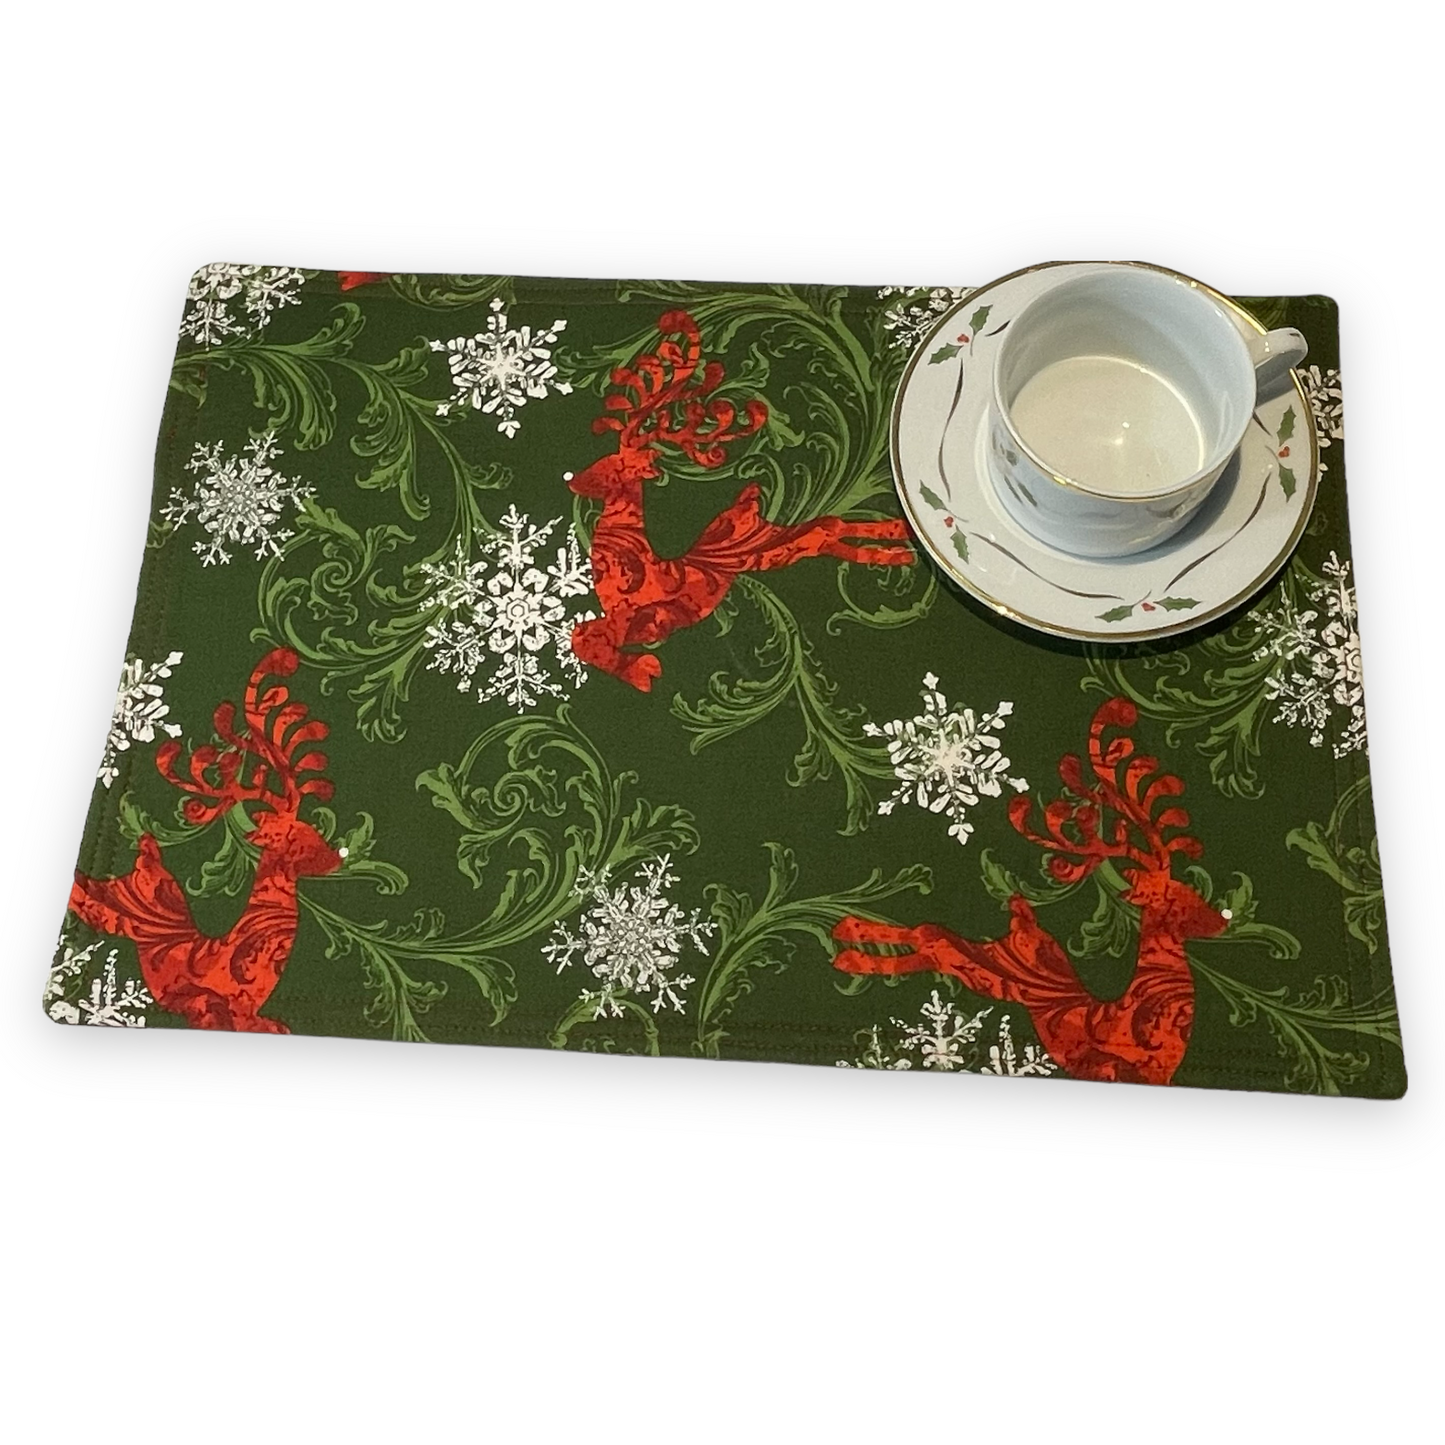 Two Christmas Reindeer Placemats, Christmas Kitchen Table Placemats, Christmas Dinner Table Decor - Home Stitchery Decor